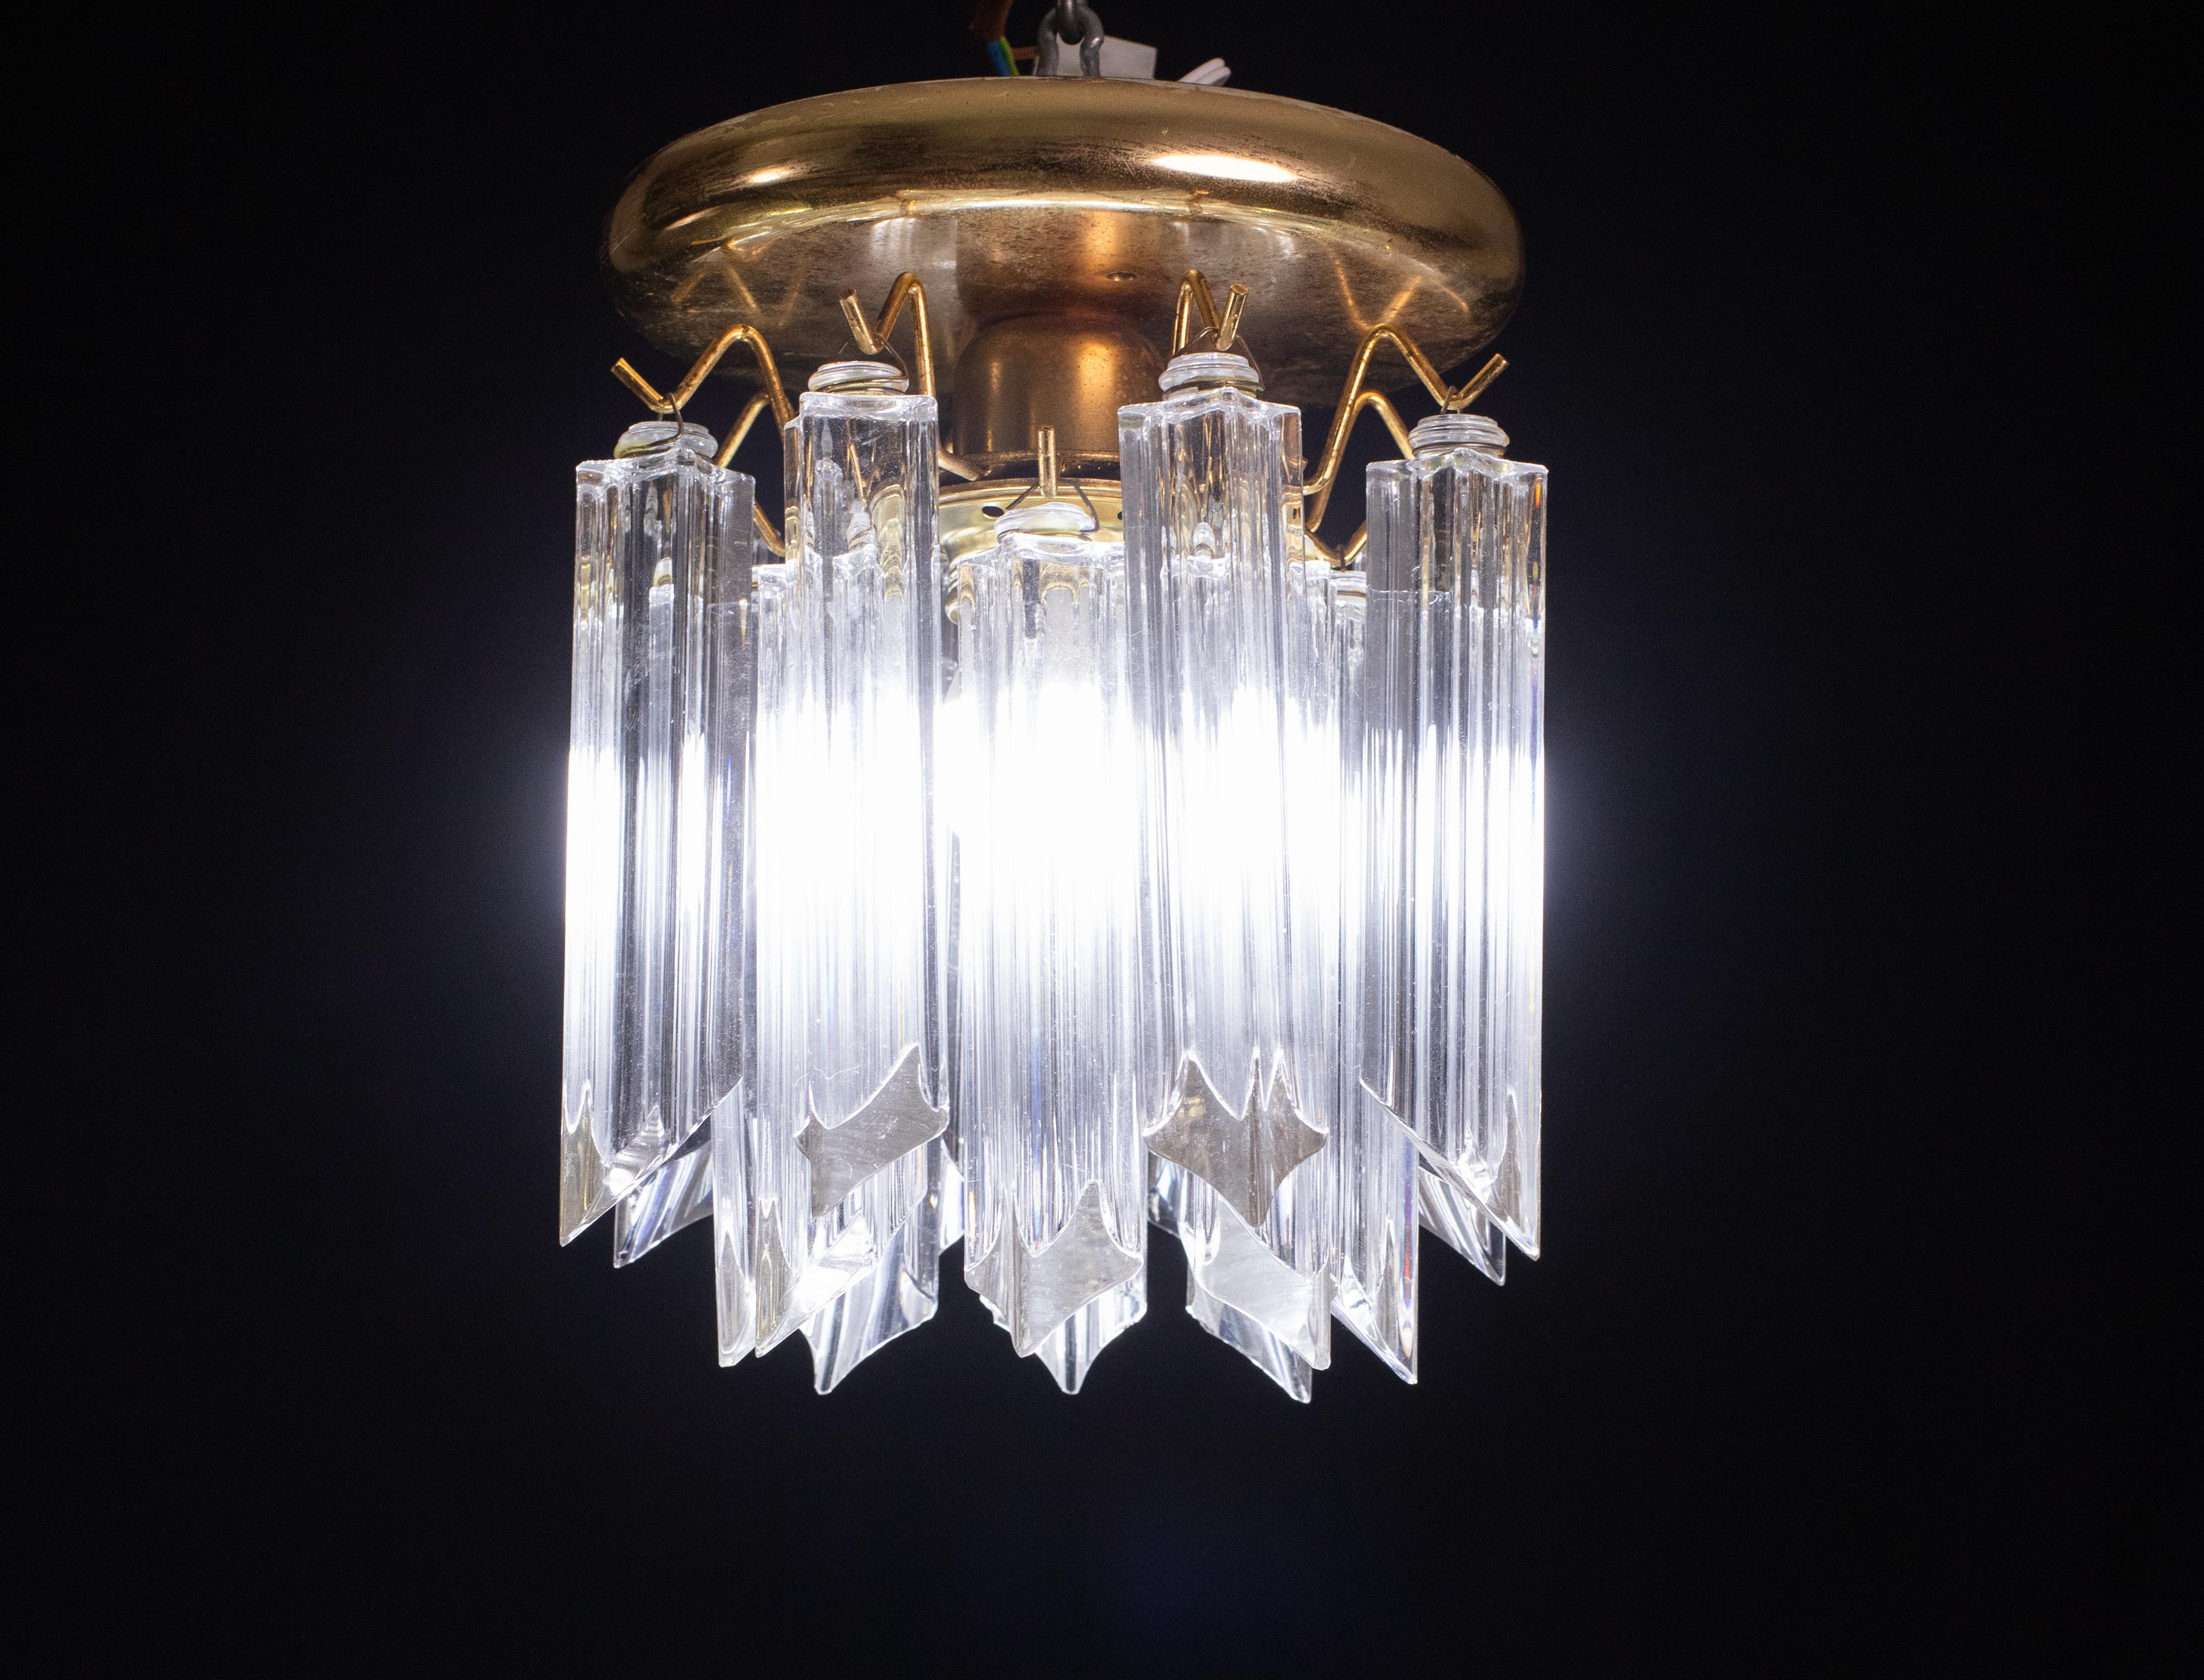 Stunning ceiling lamps attributed to Venini formed of prism-shaped glass.
Each pair mounts a light fitting.
Height 23 centimeters, diameter 20 centimeters.
Period: 1960